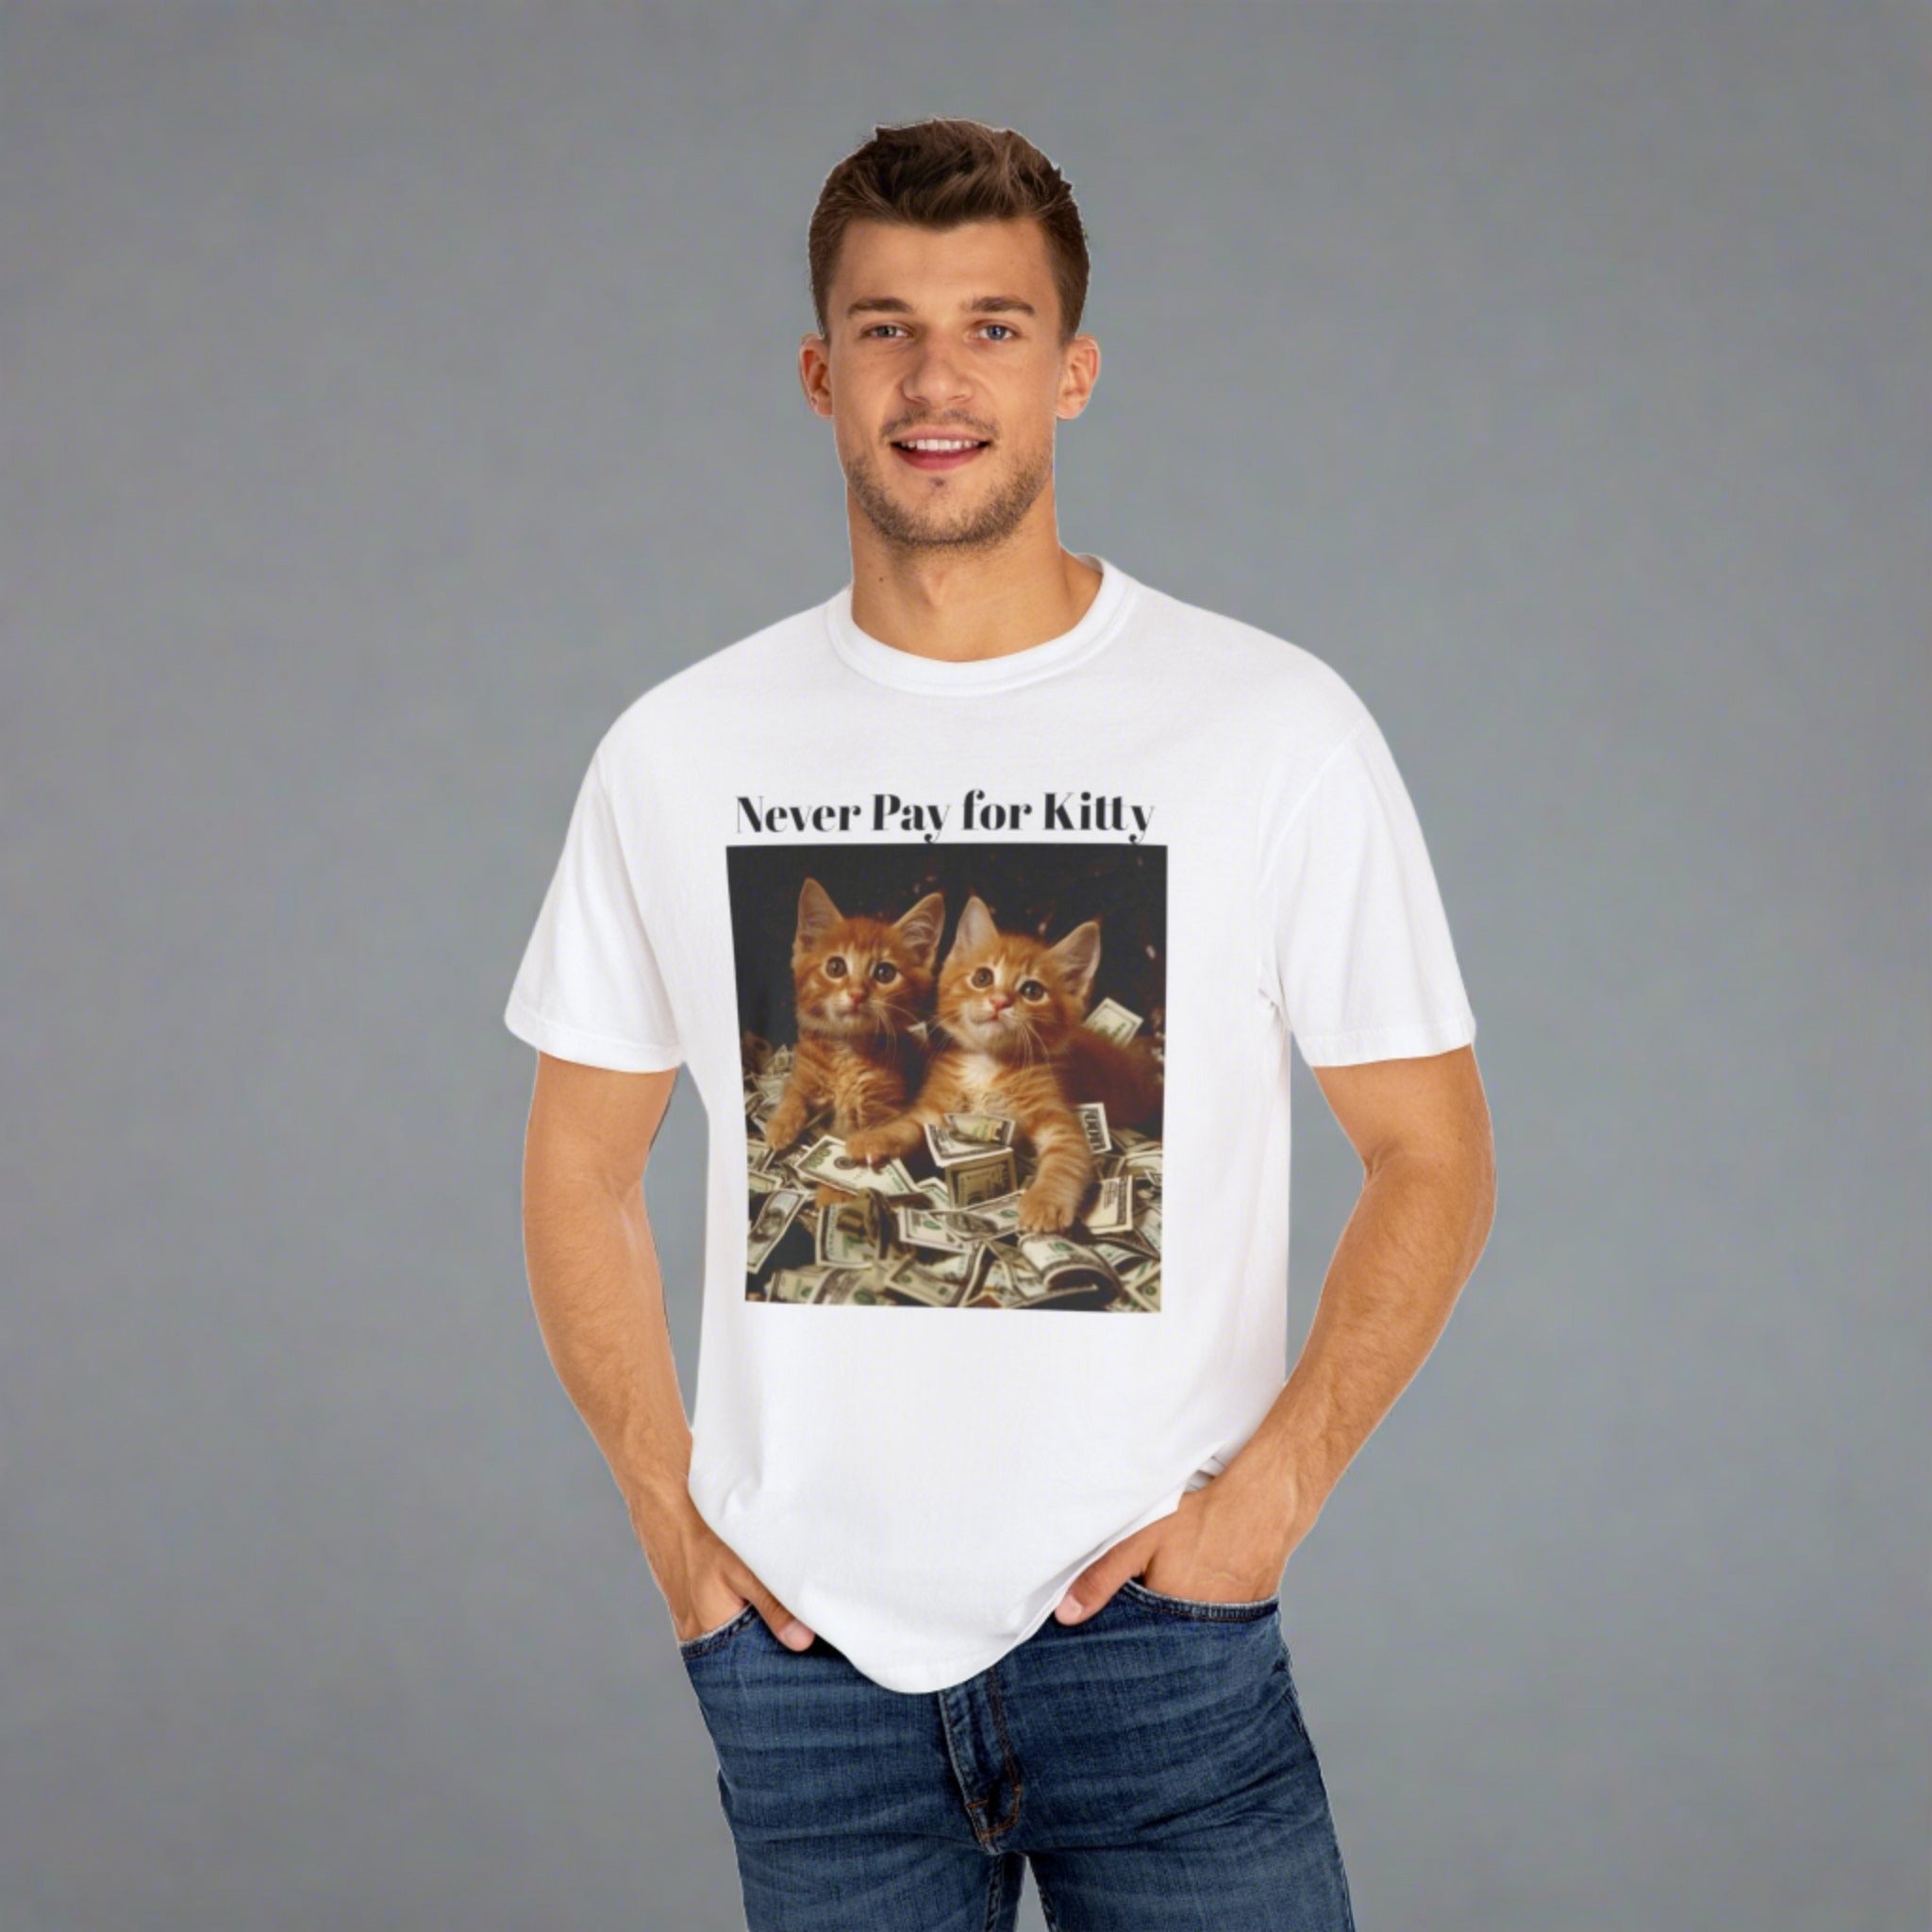 Dating humor t-shirt, cash kittens graphic tee, unisex funny dating shirt, garment-dyed humor t-shirt, playful kitten apparel, never pay for kitty shirt, money kittens unisex tee, casual dating joke shirt, comfortable humorous t-shirt, conversational piece tee, funny slogan t-shirt, edgy humor clothing, cash and kittens top, stylish joke t-shirt, cheeky graphic tee